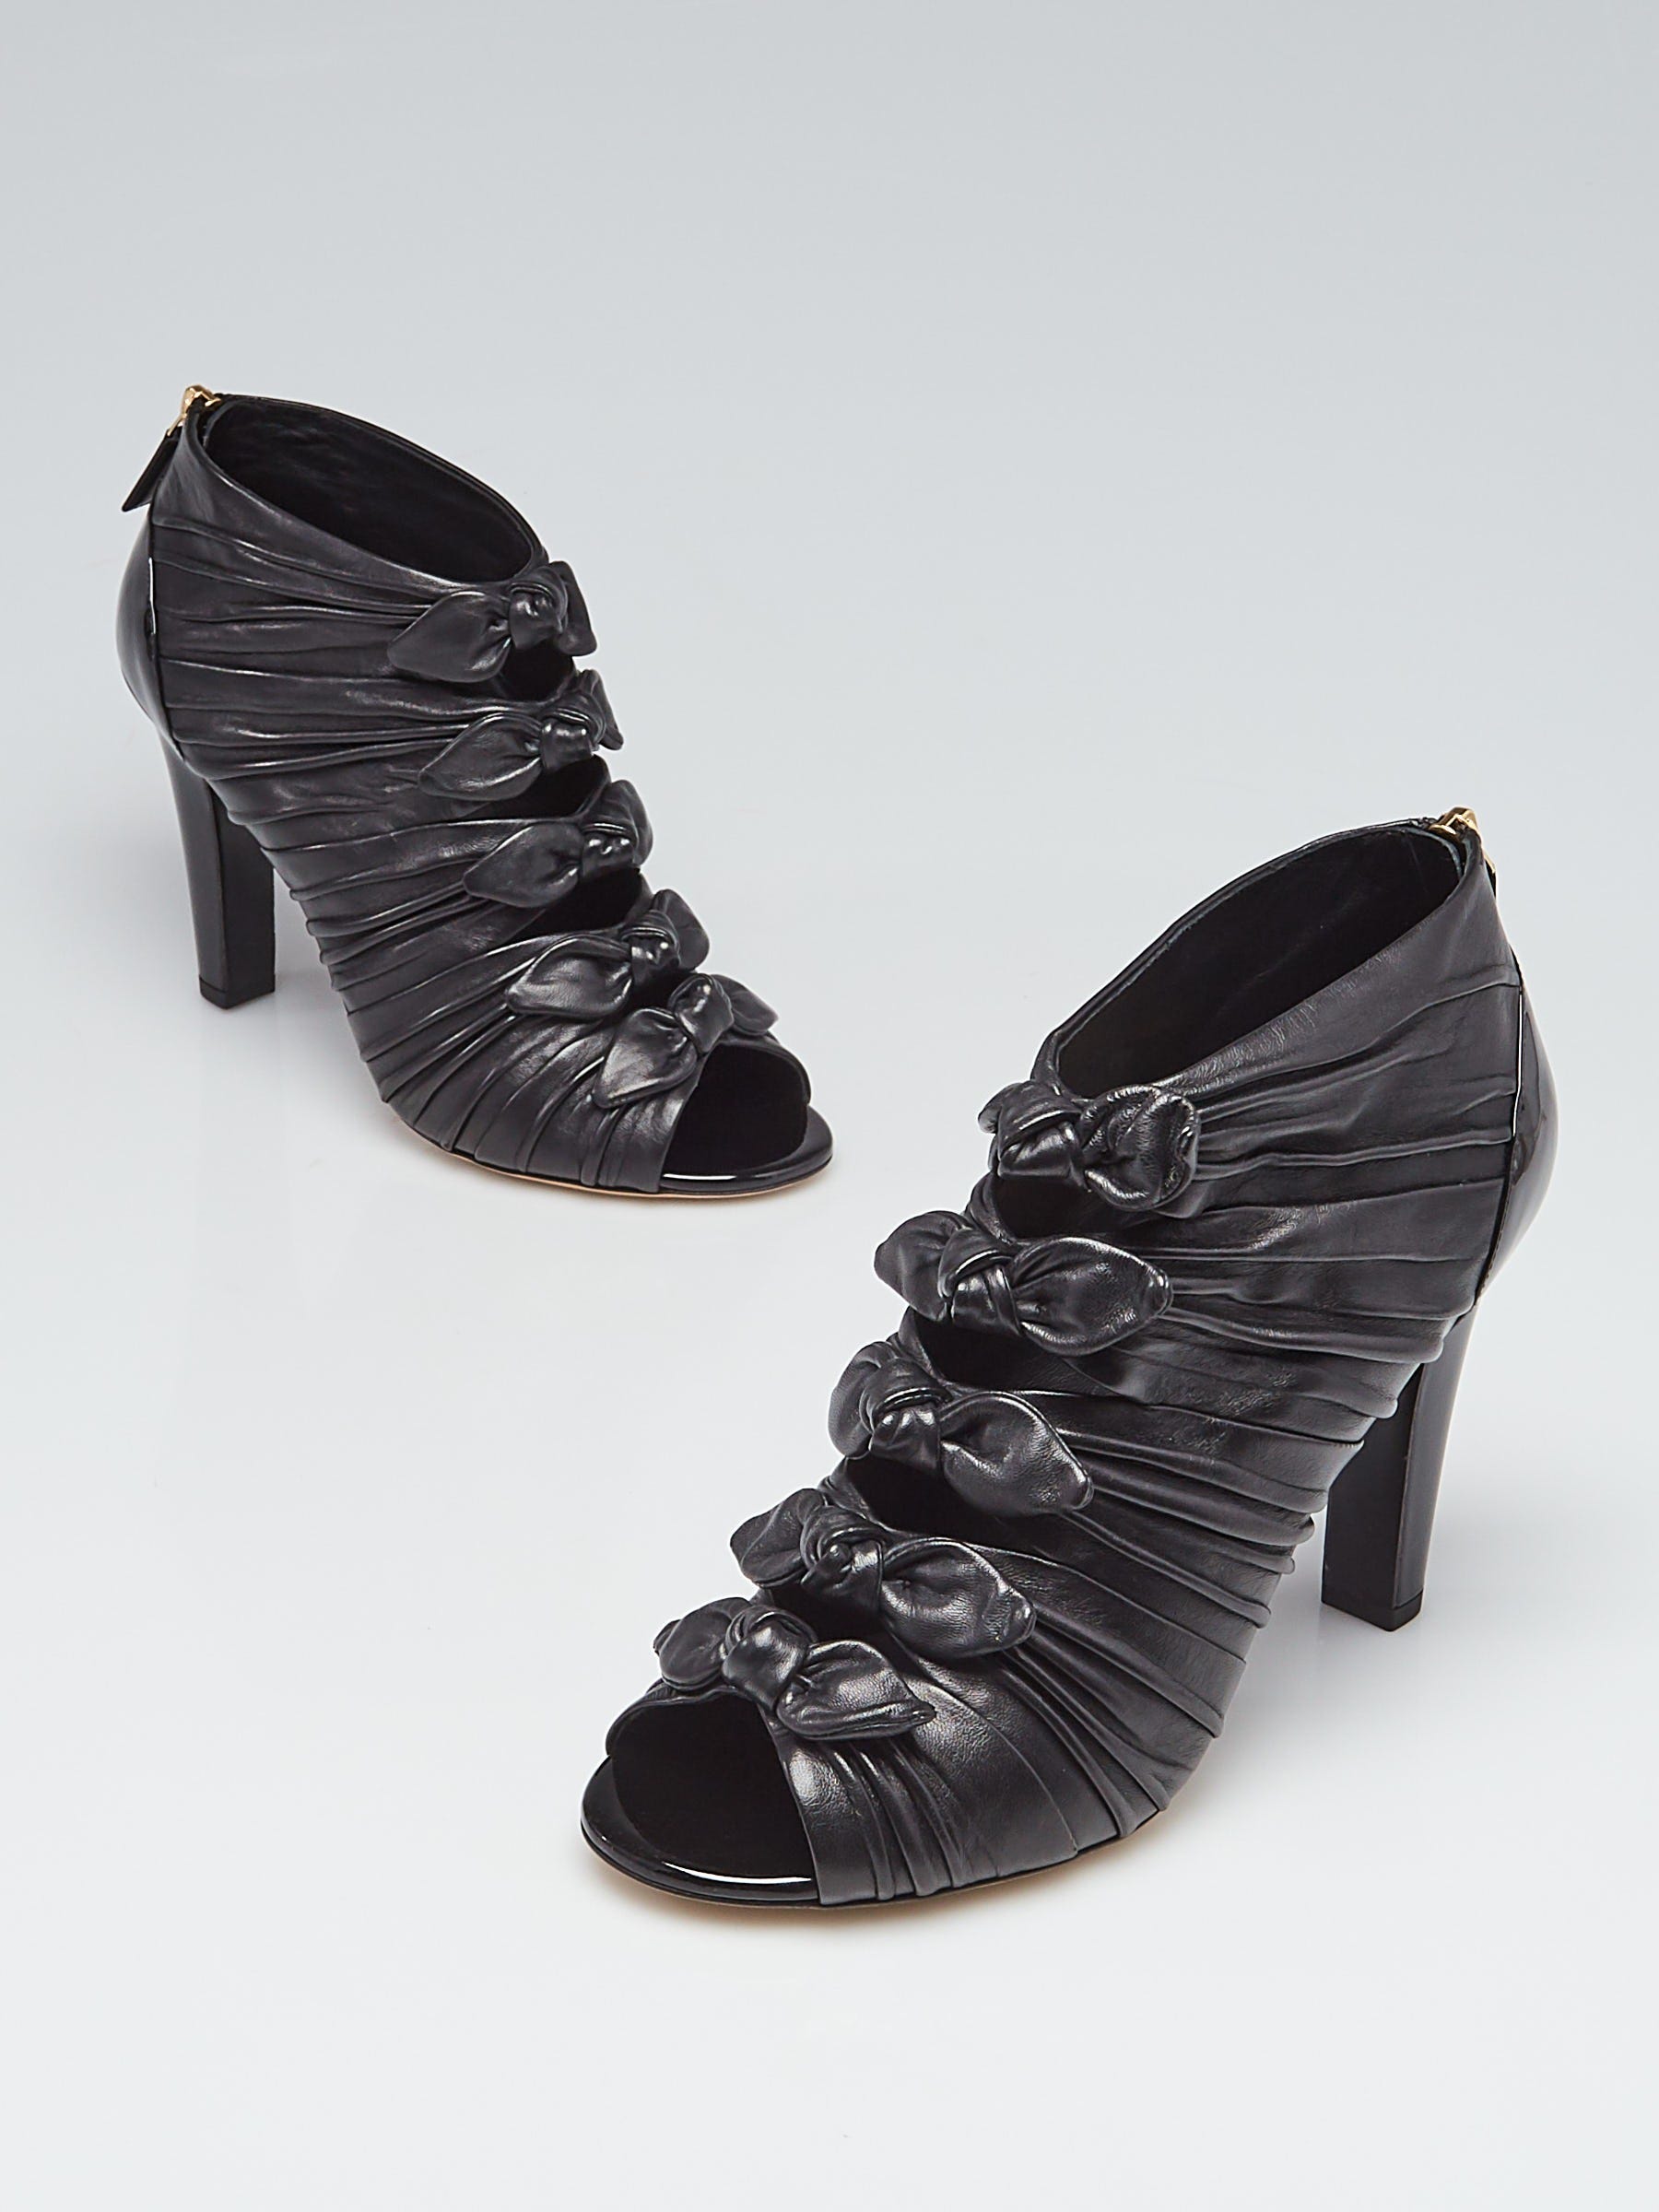 Chanel Black Leather/Patent Leather Open Toe Knotted Booties Size 9/39.5 -  Yoogi's Closet